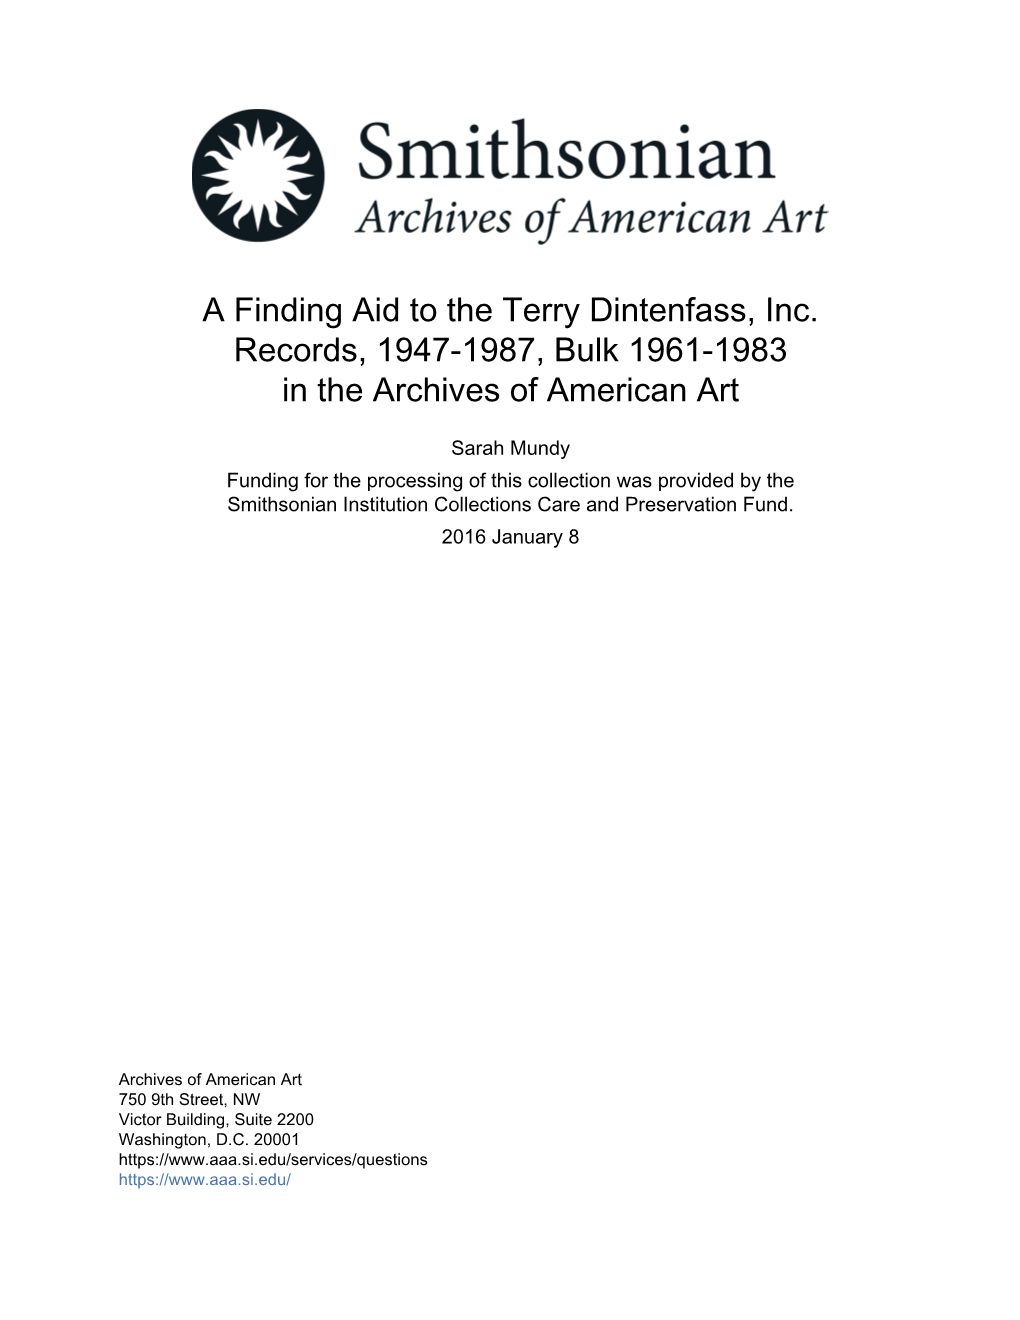 A Finding Aid to the Terry Dintenfass, Inc. Records, 1947-1987, Bulk 1961-1983 in the Archives of American Art